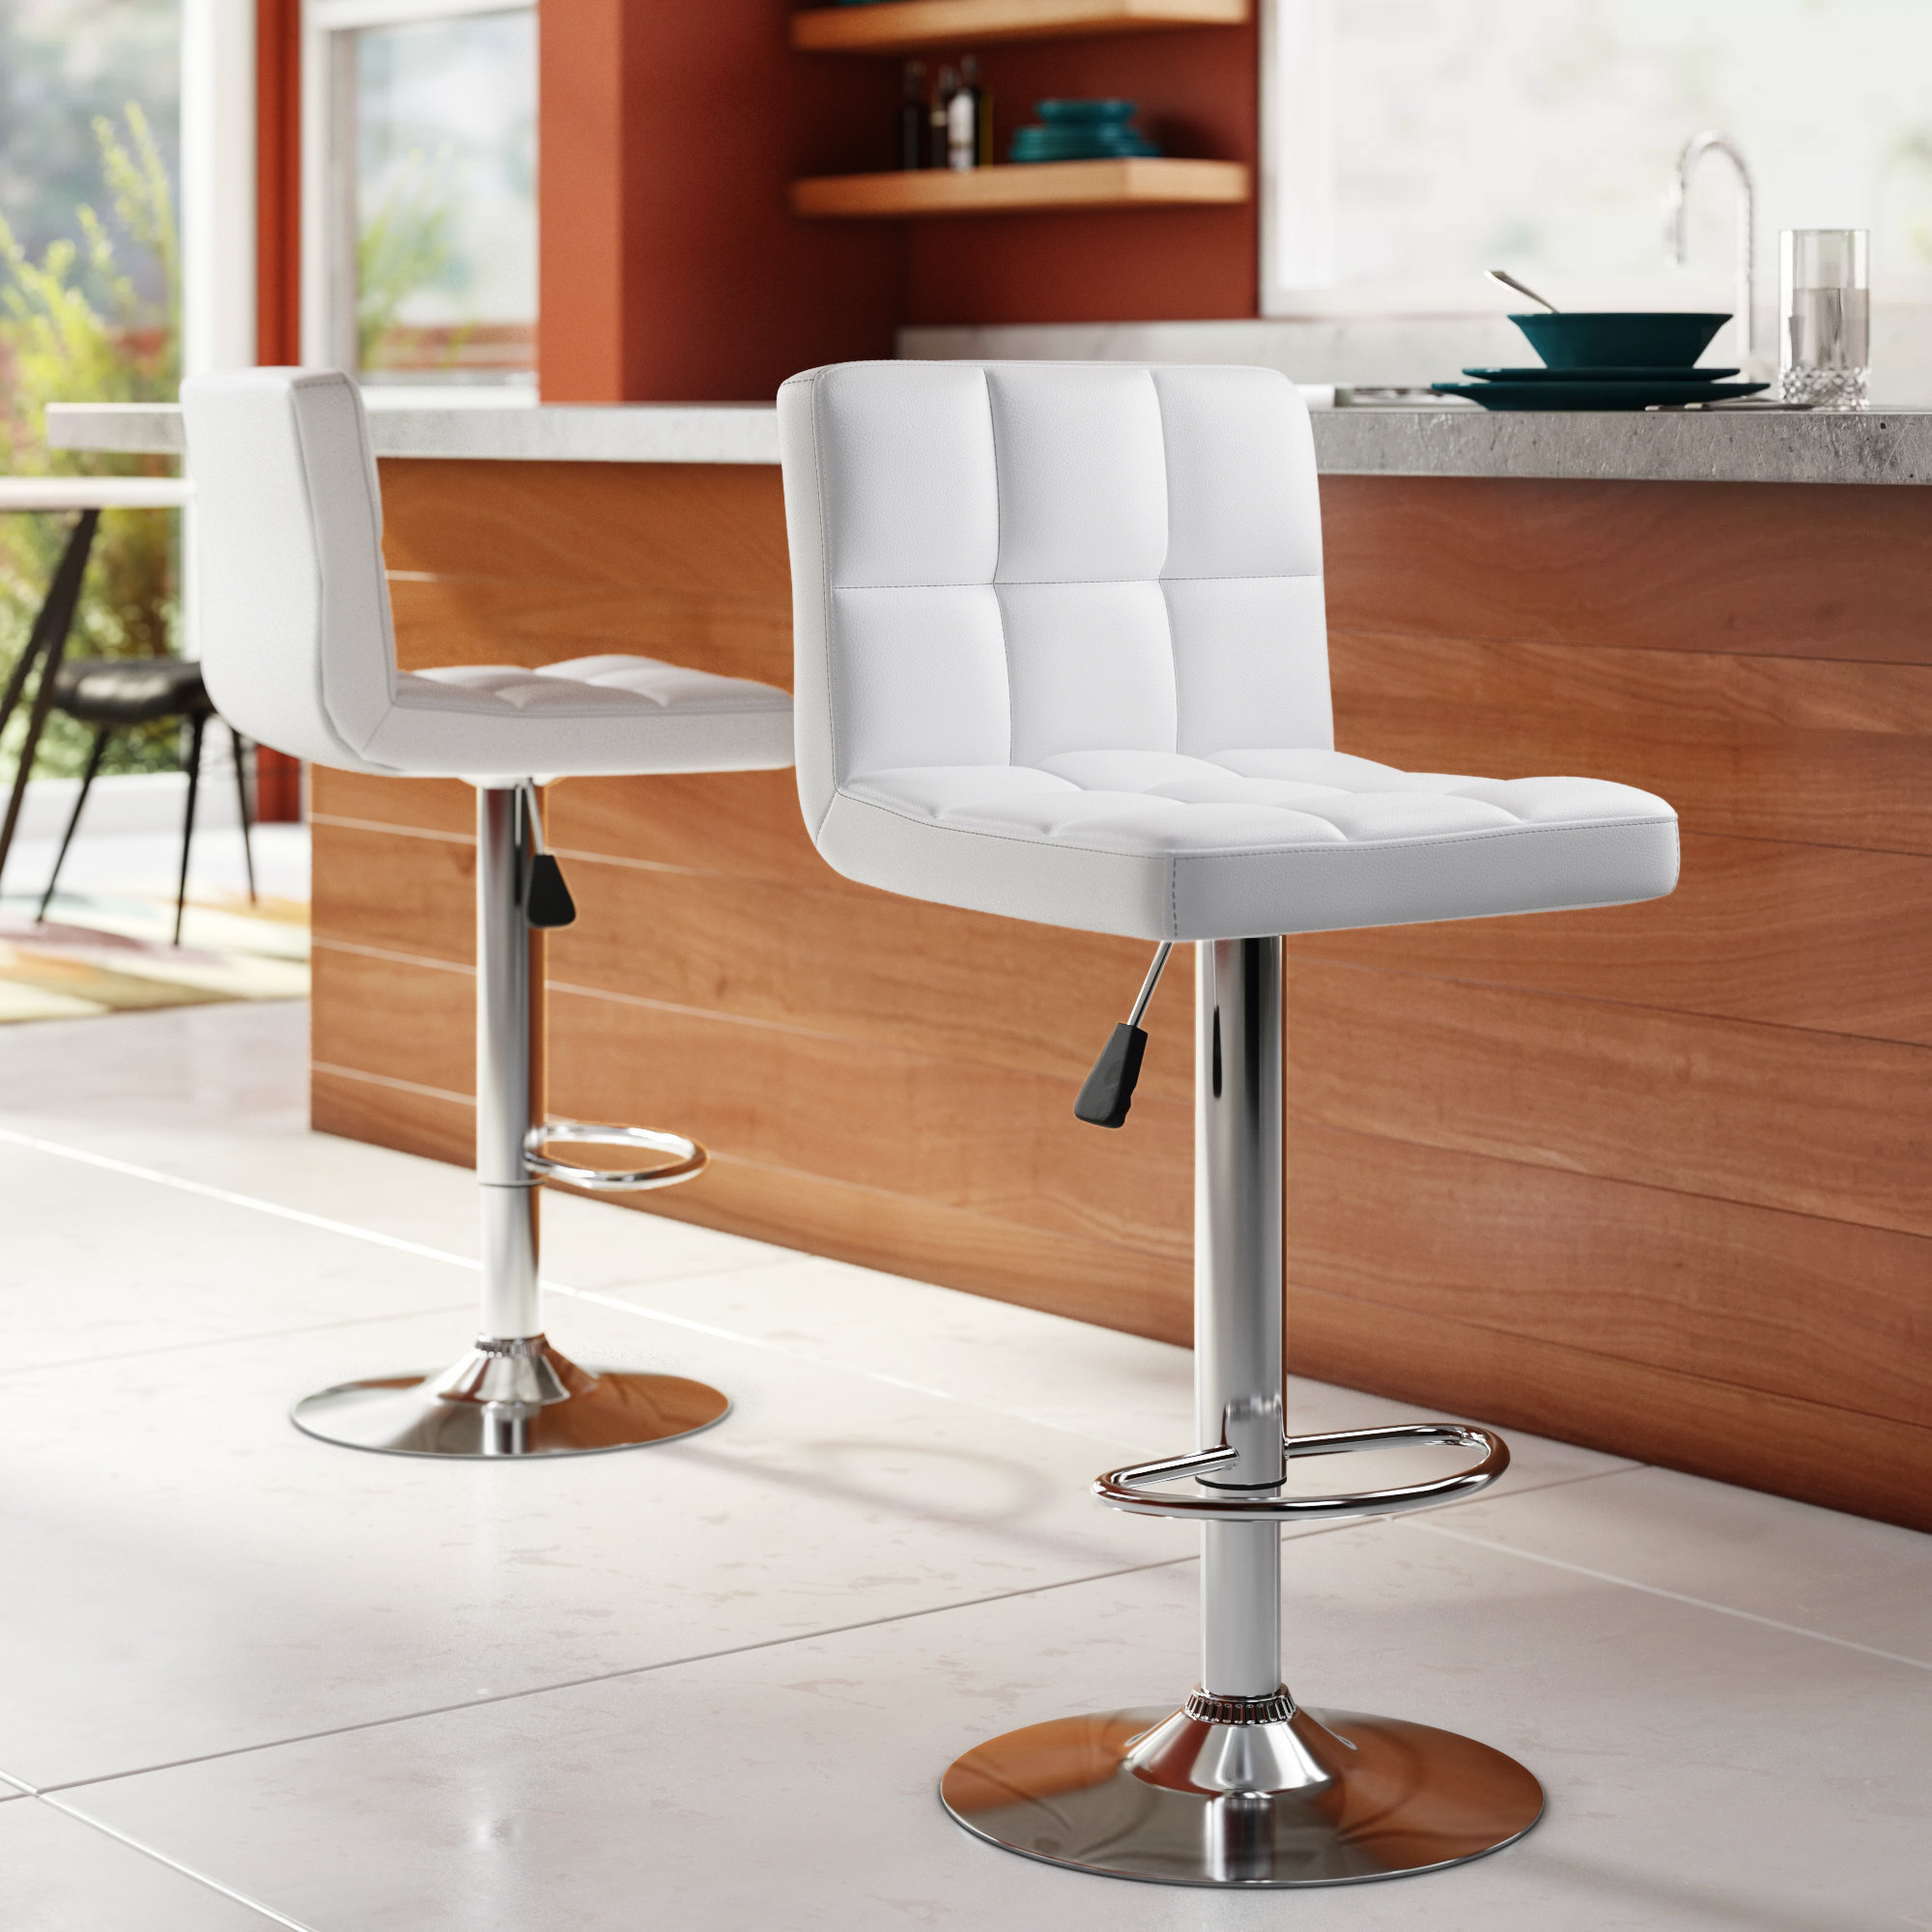 Extra Comfort Bar Stool With Low Back Support Adjustable 360 Swivel Set Of 2